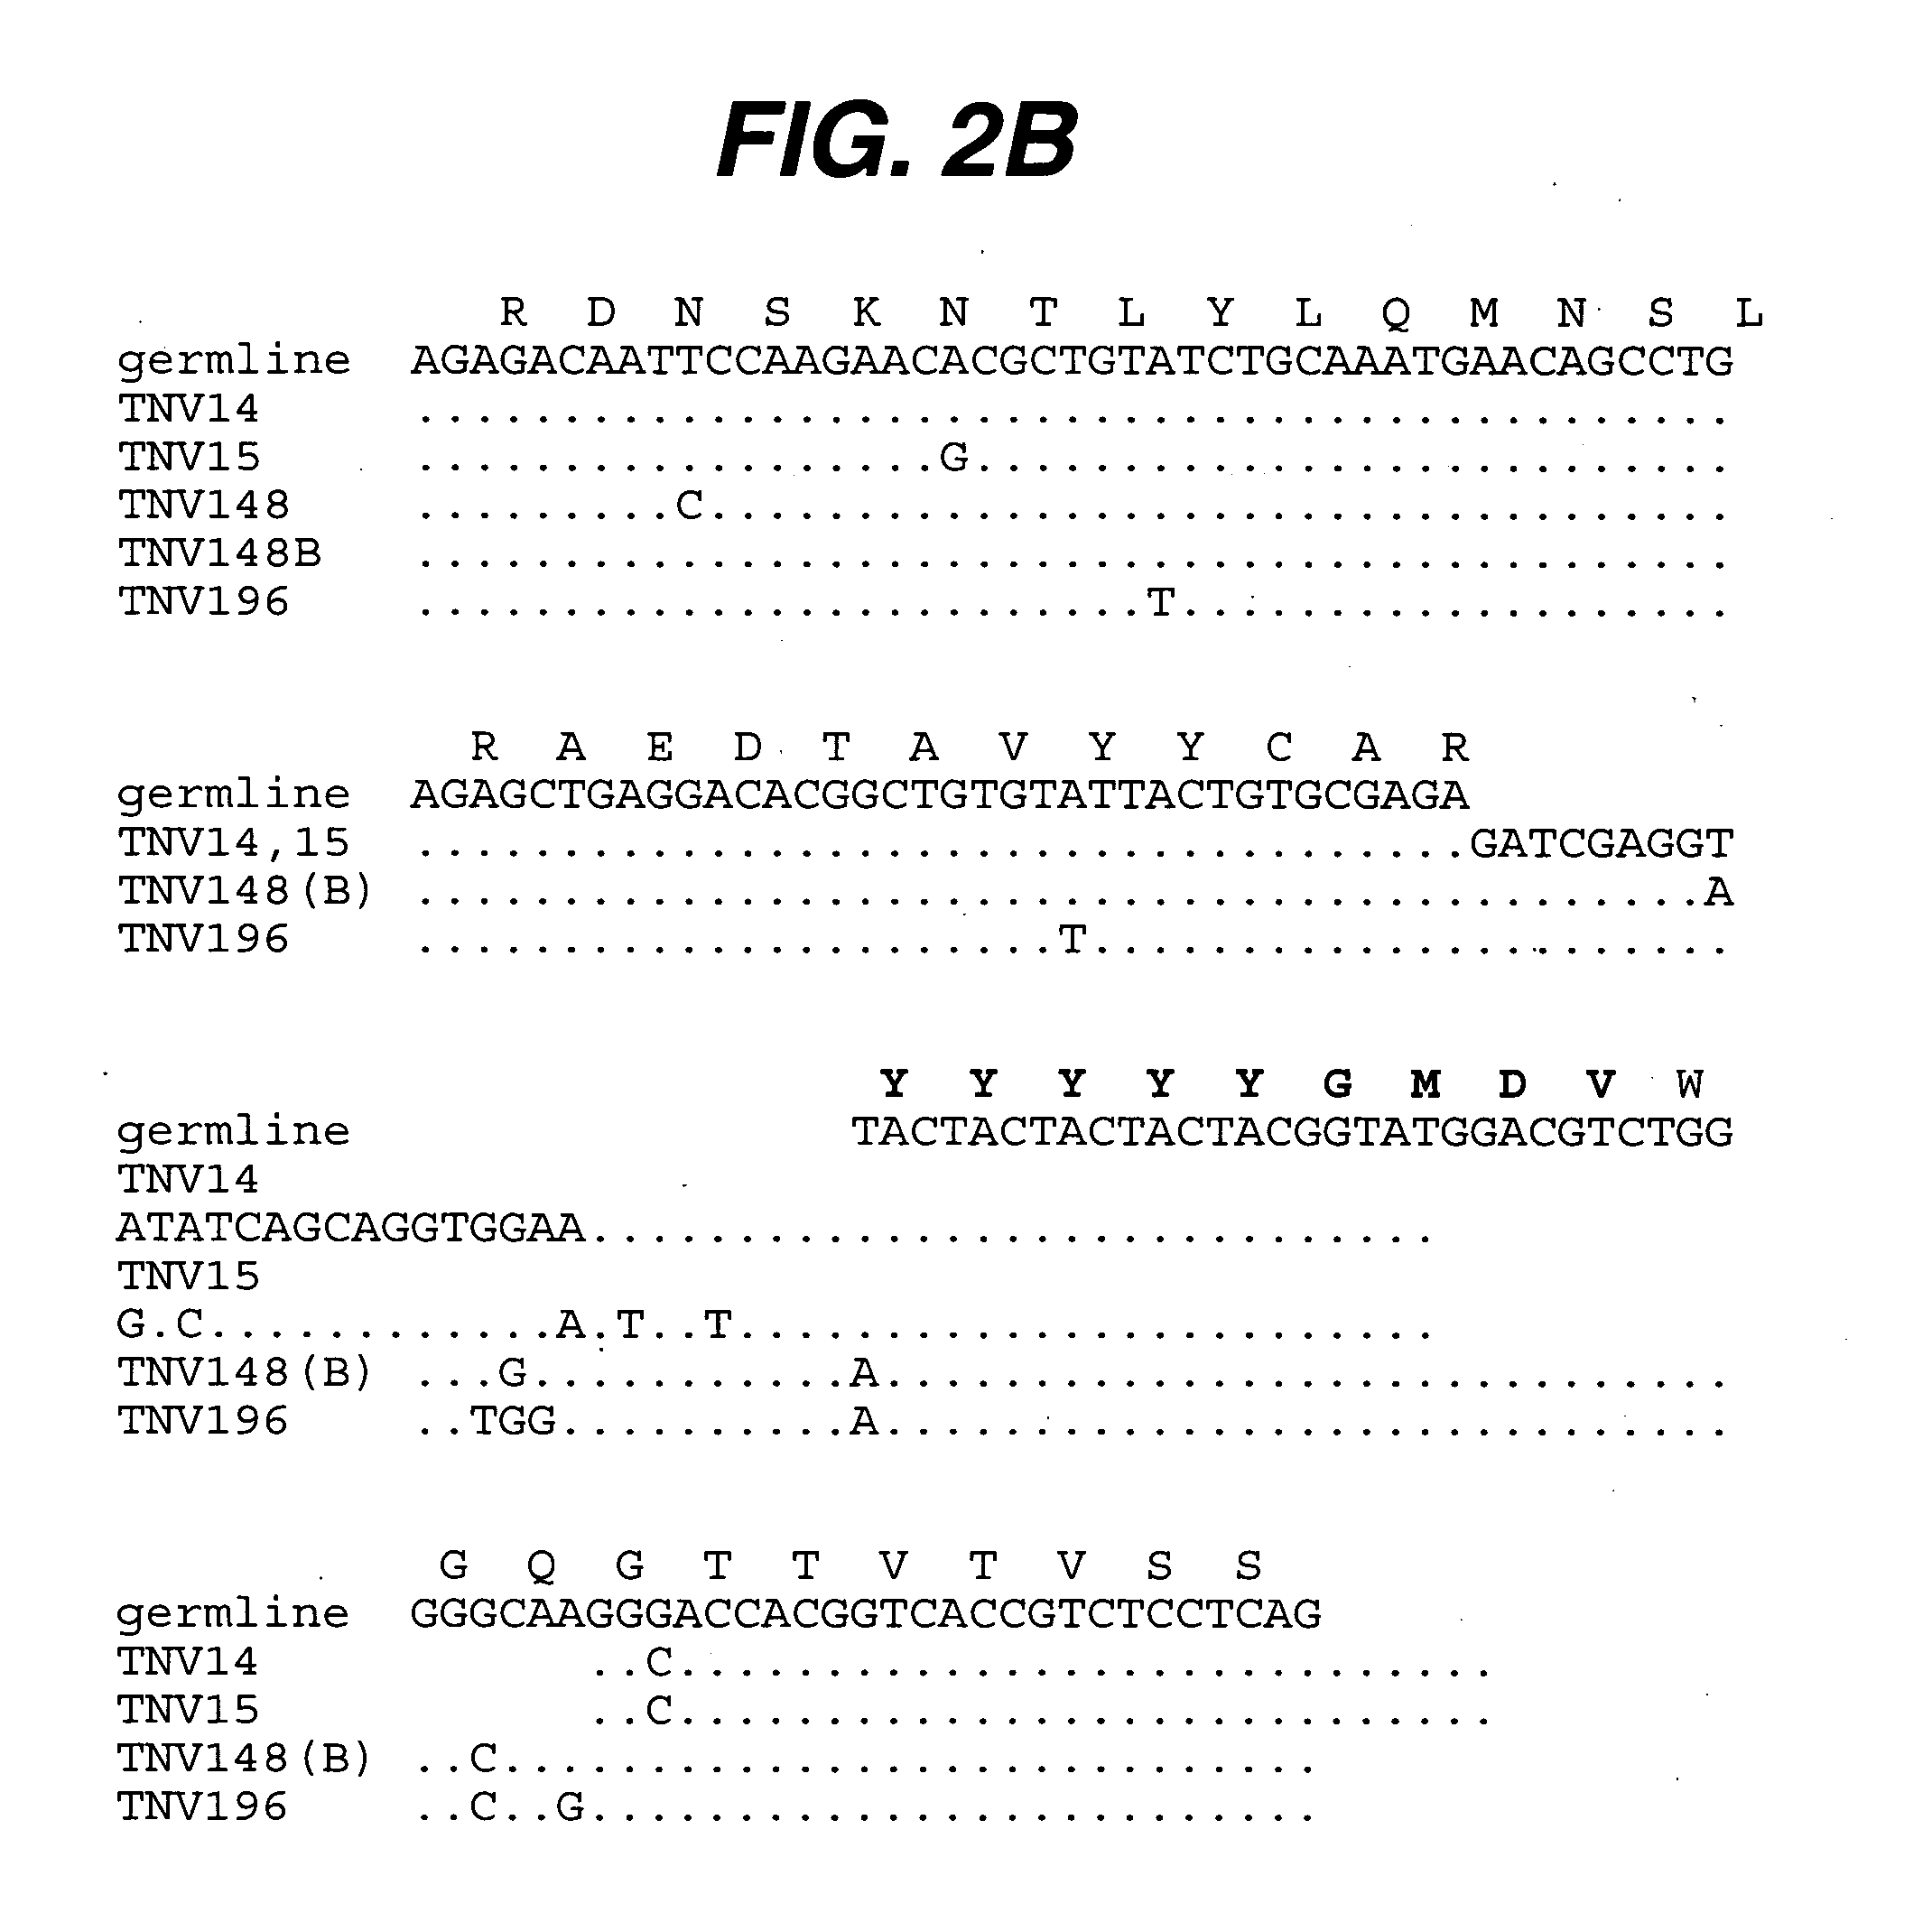 Anti-TNF antibodies, compositions, methods and uses